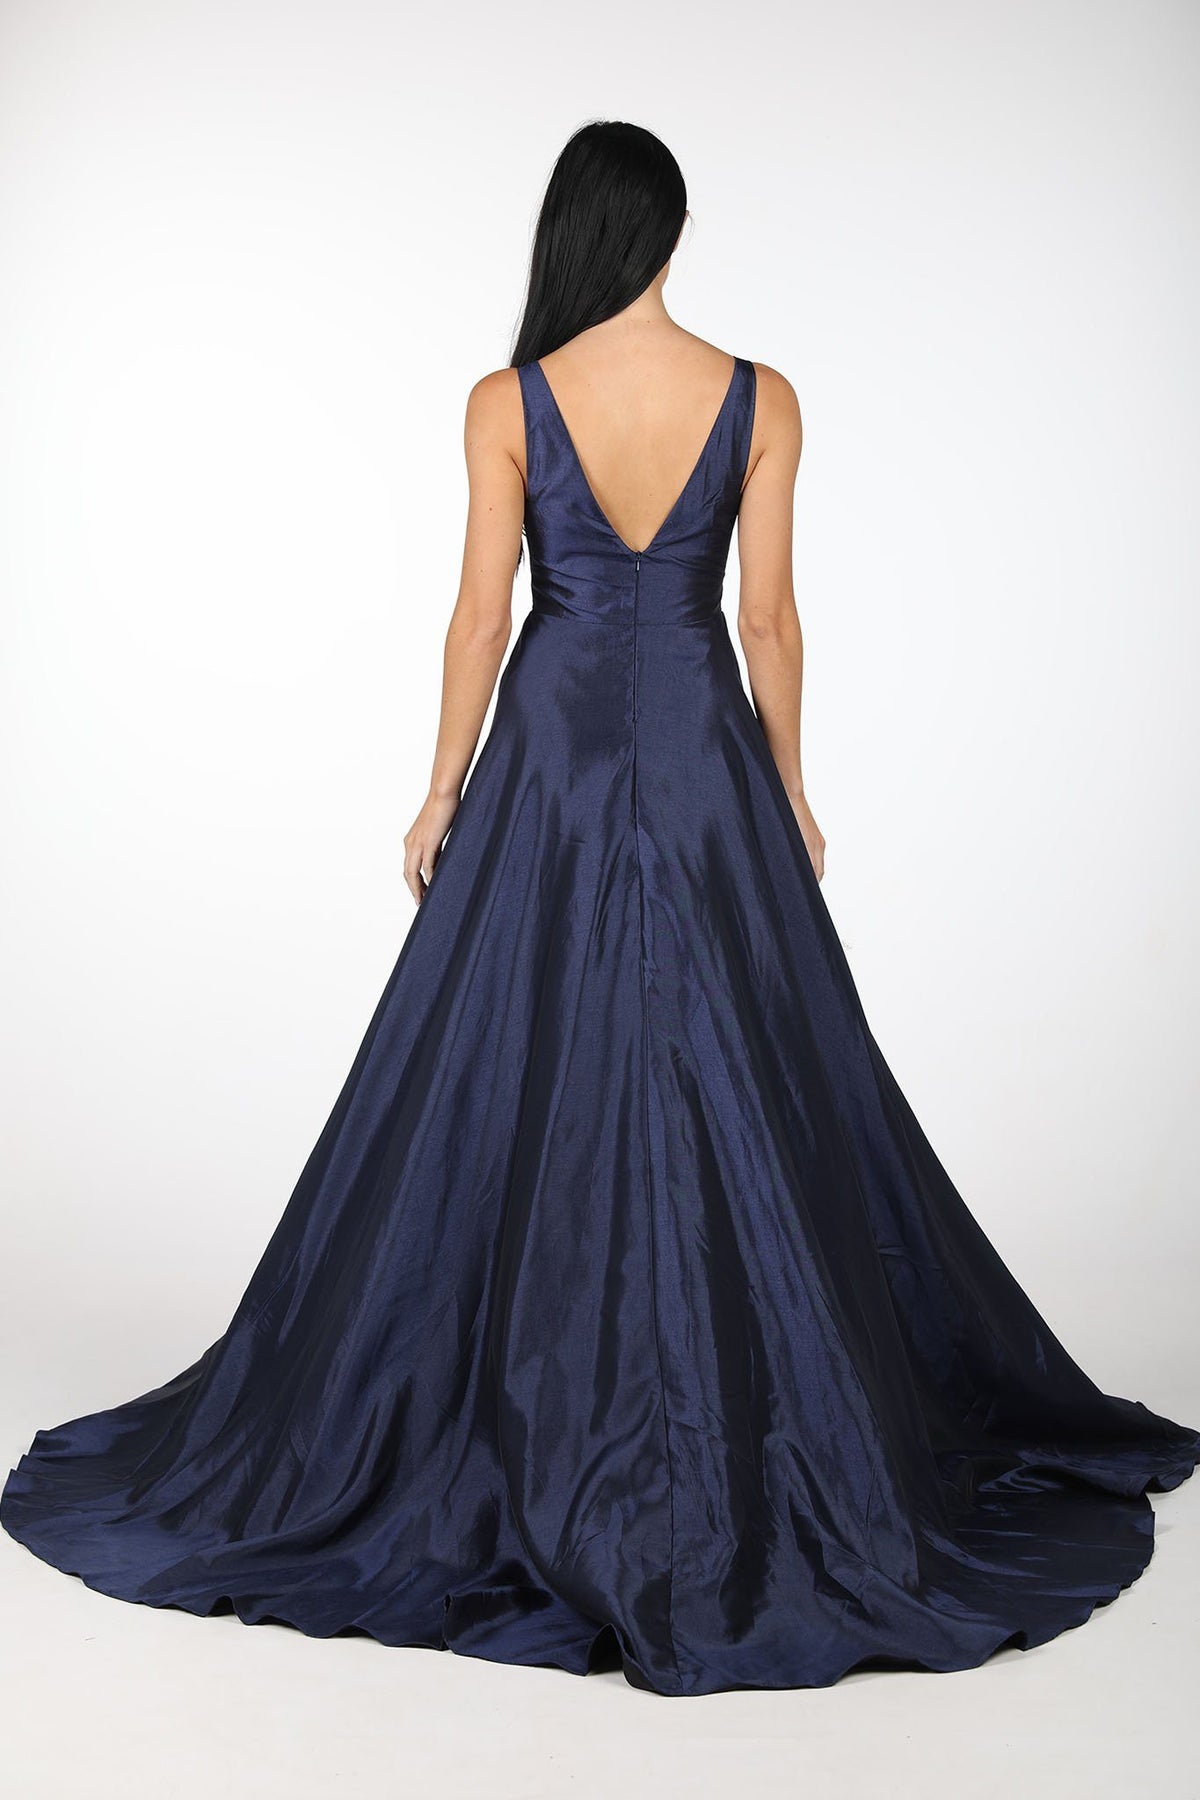 Back Image of Navy Satin Ball Gown with V-Neck and V Open Back Showing Wide Flared Skirt